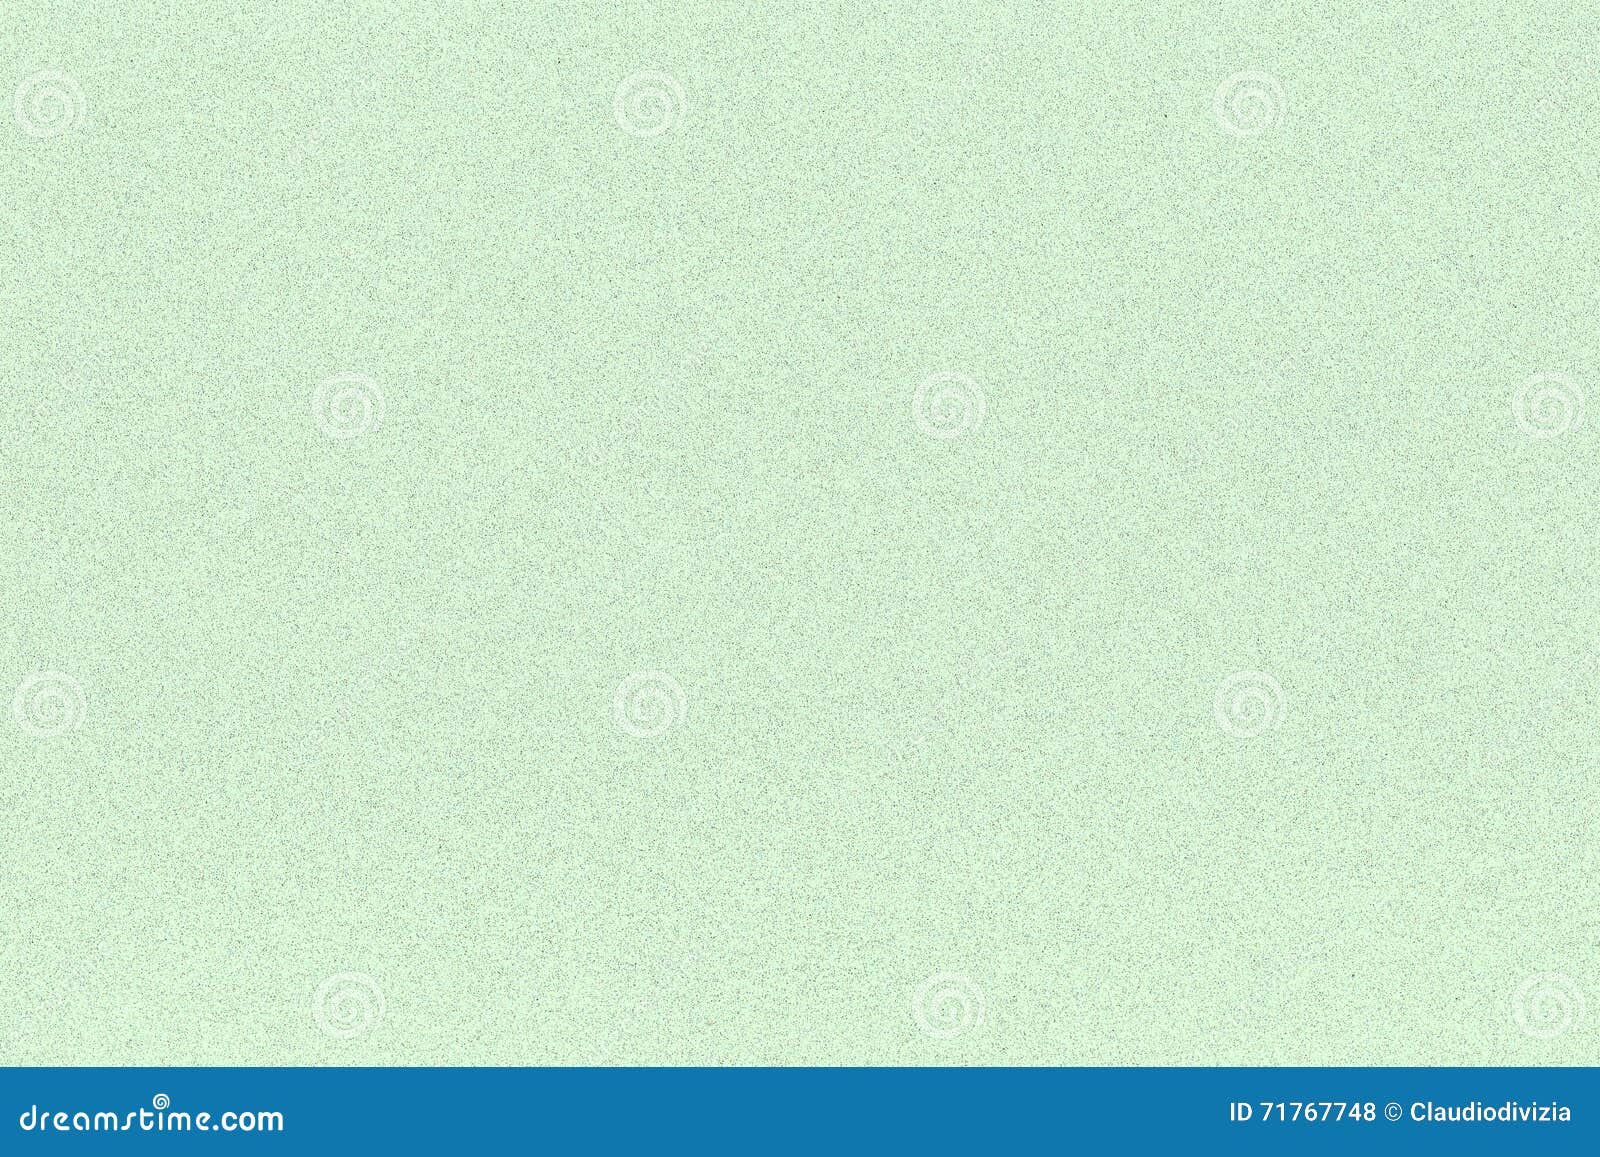 Light Green Background with Shiny Color Speckles Stock Photo - Image of ...